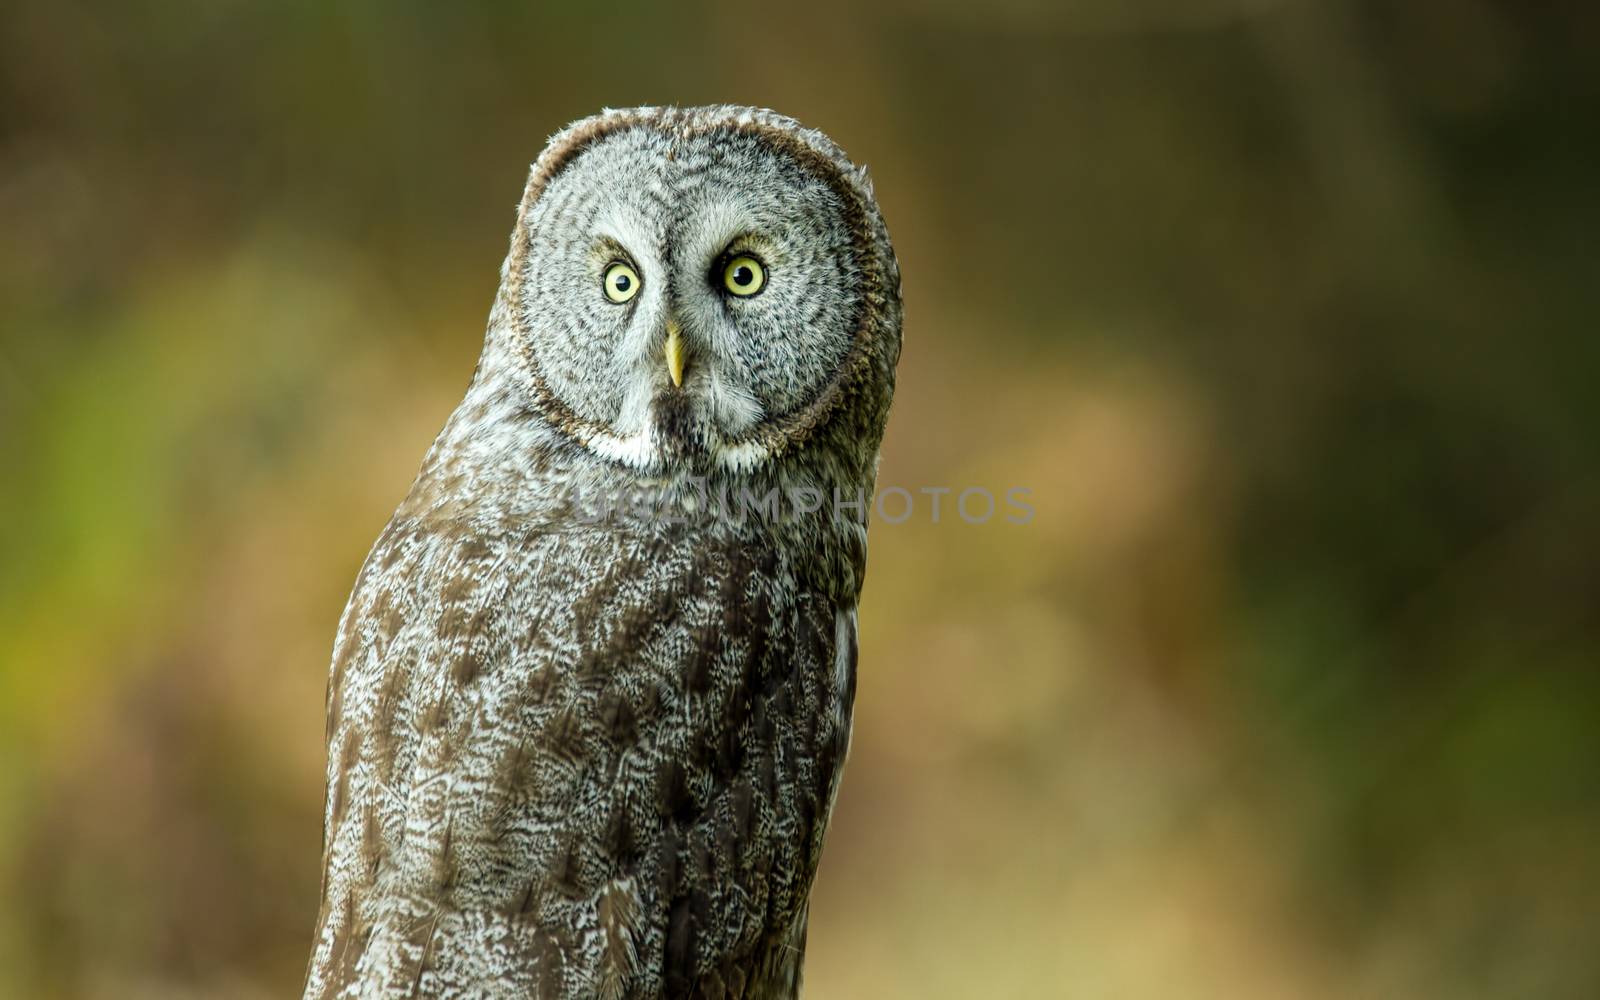 Wild Owl in Nature by backyard_photography